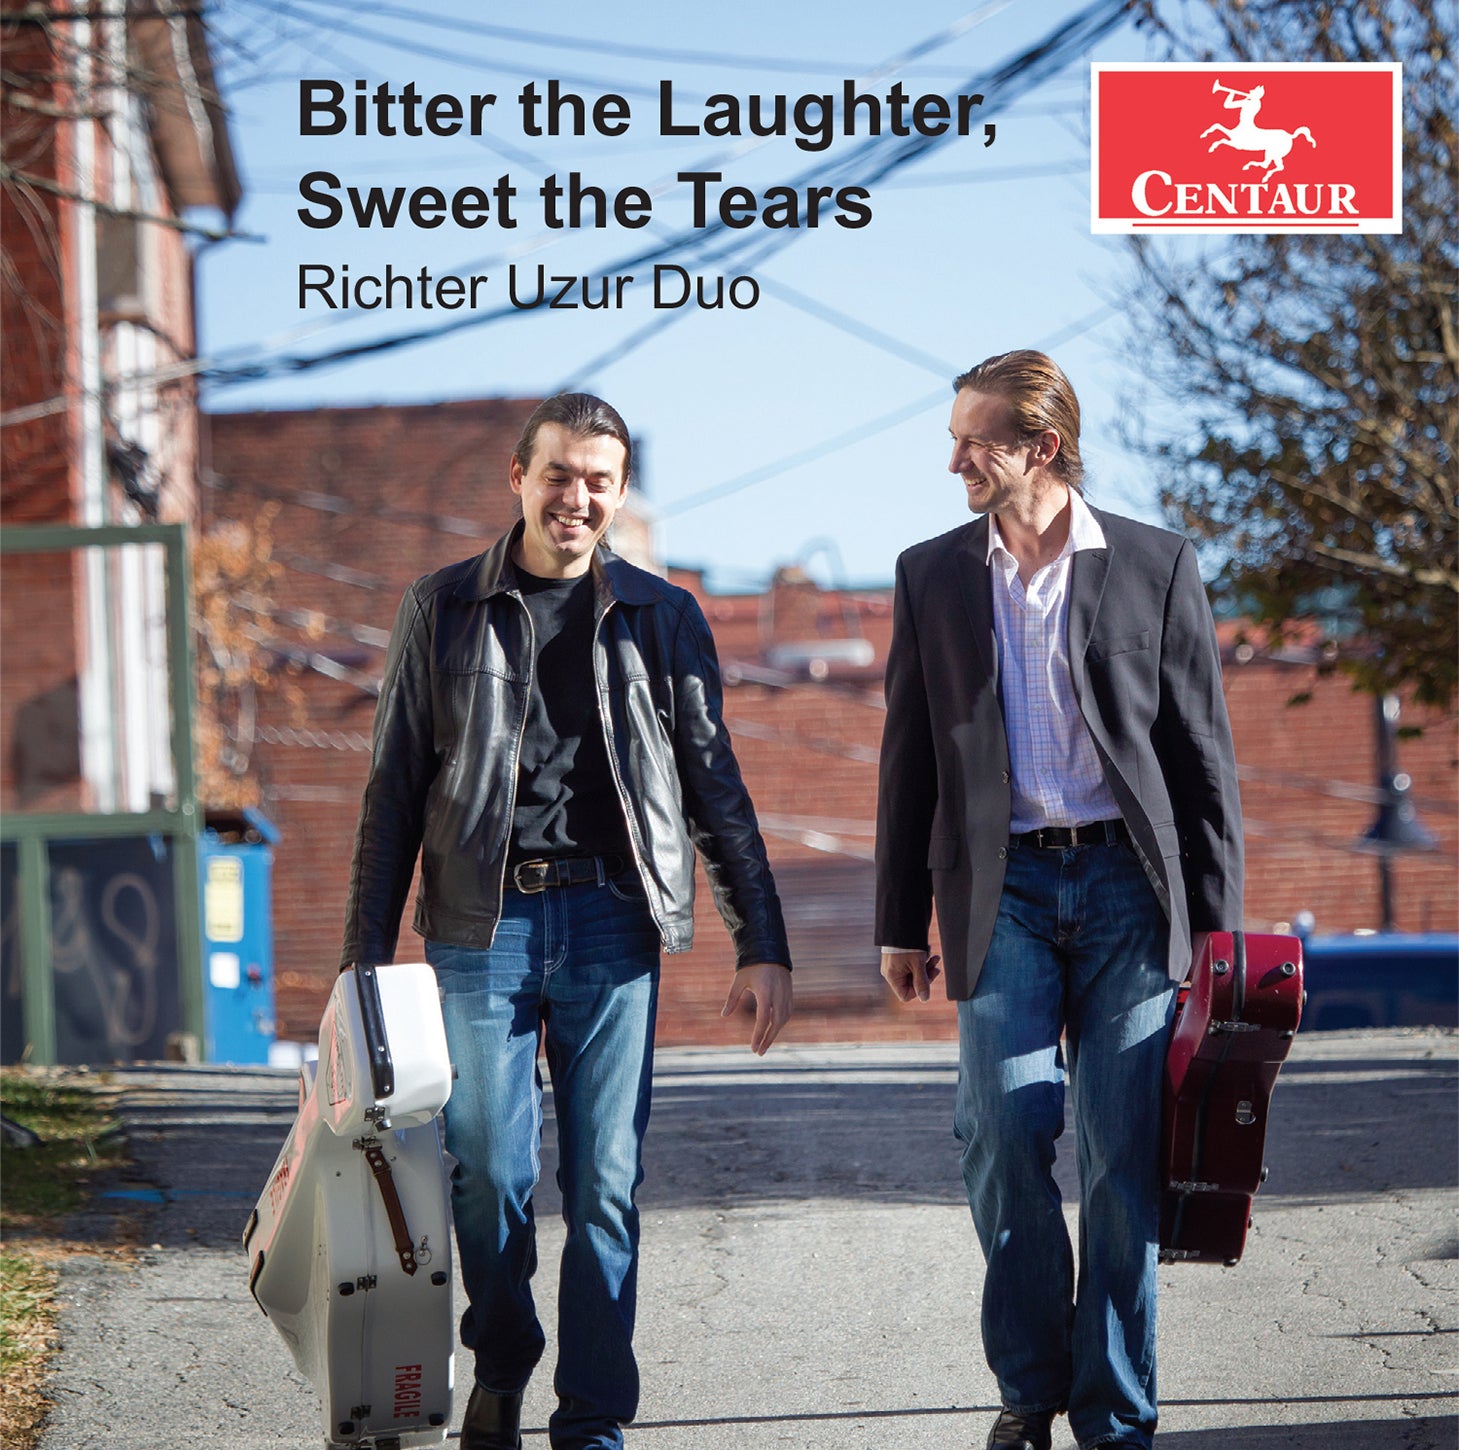 Bitter the Laughter, Sweet the Tears / Richter Uzur Duo